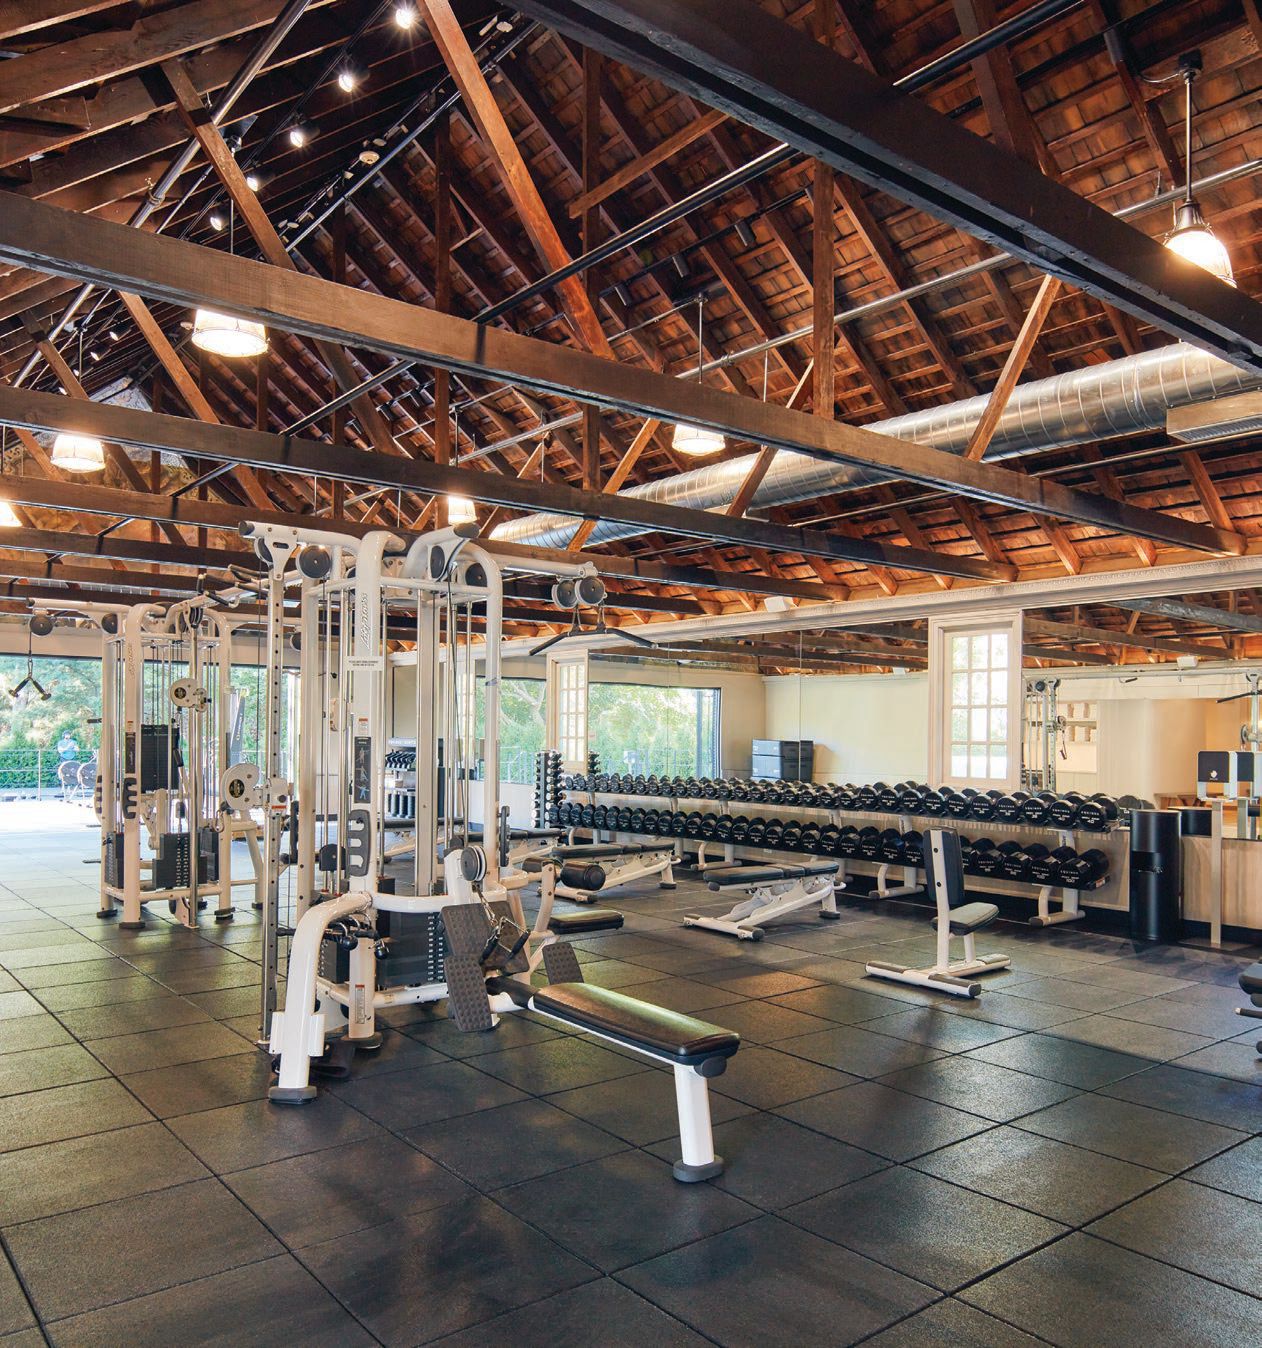 Working out has never looked so good. On top of a fully equipped gym and an array of classes, the space is complete with neutral tones, textured finishes and a surplus of natural light. PHOTO COURTESY OF BRAND